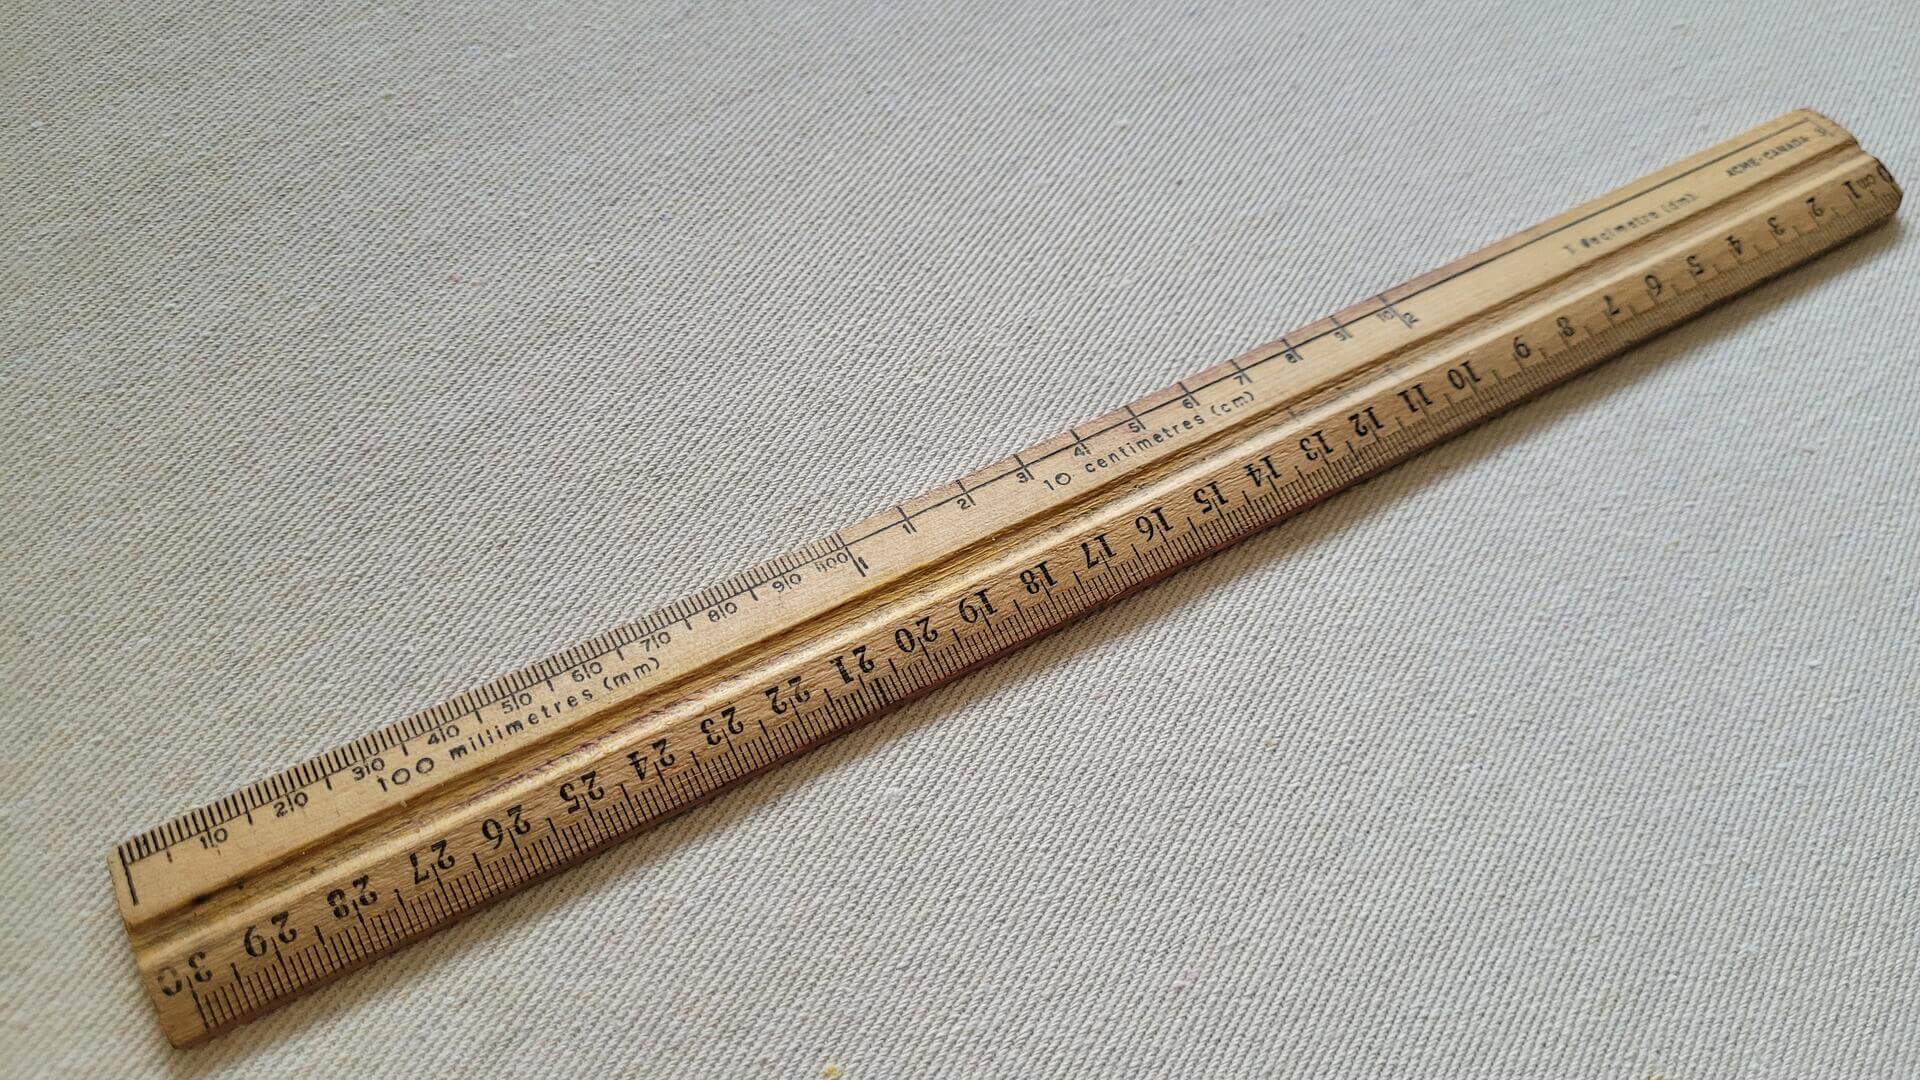 1970s Acme Canada 30cm metric wooden rule made for Spectrum Educational Supplies Limited. Vintage made in Canada collectible marking and measuring tool